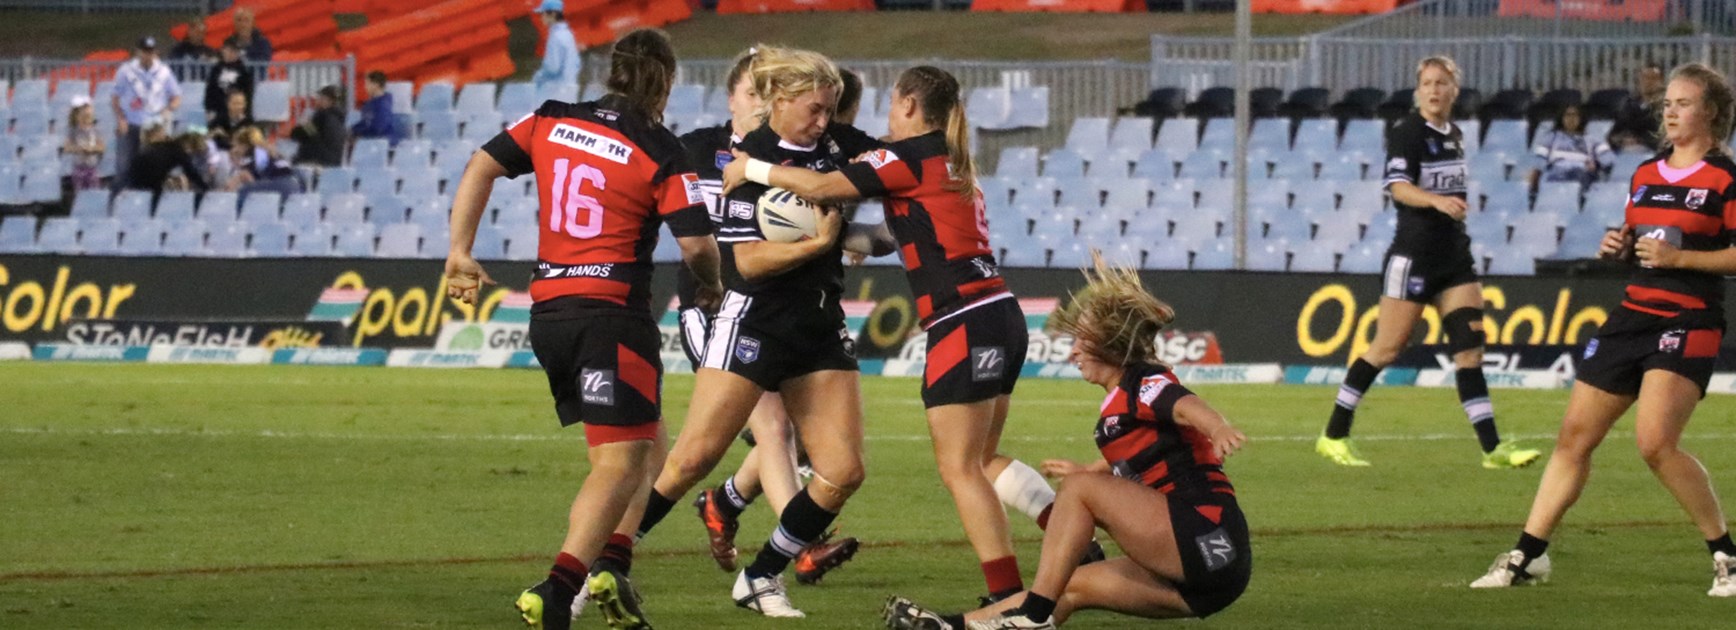 Clinical Sharks girls too strong for the Bears